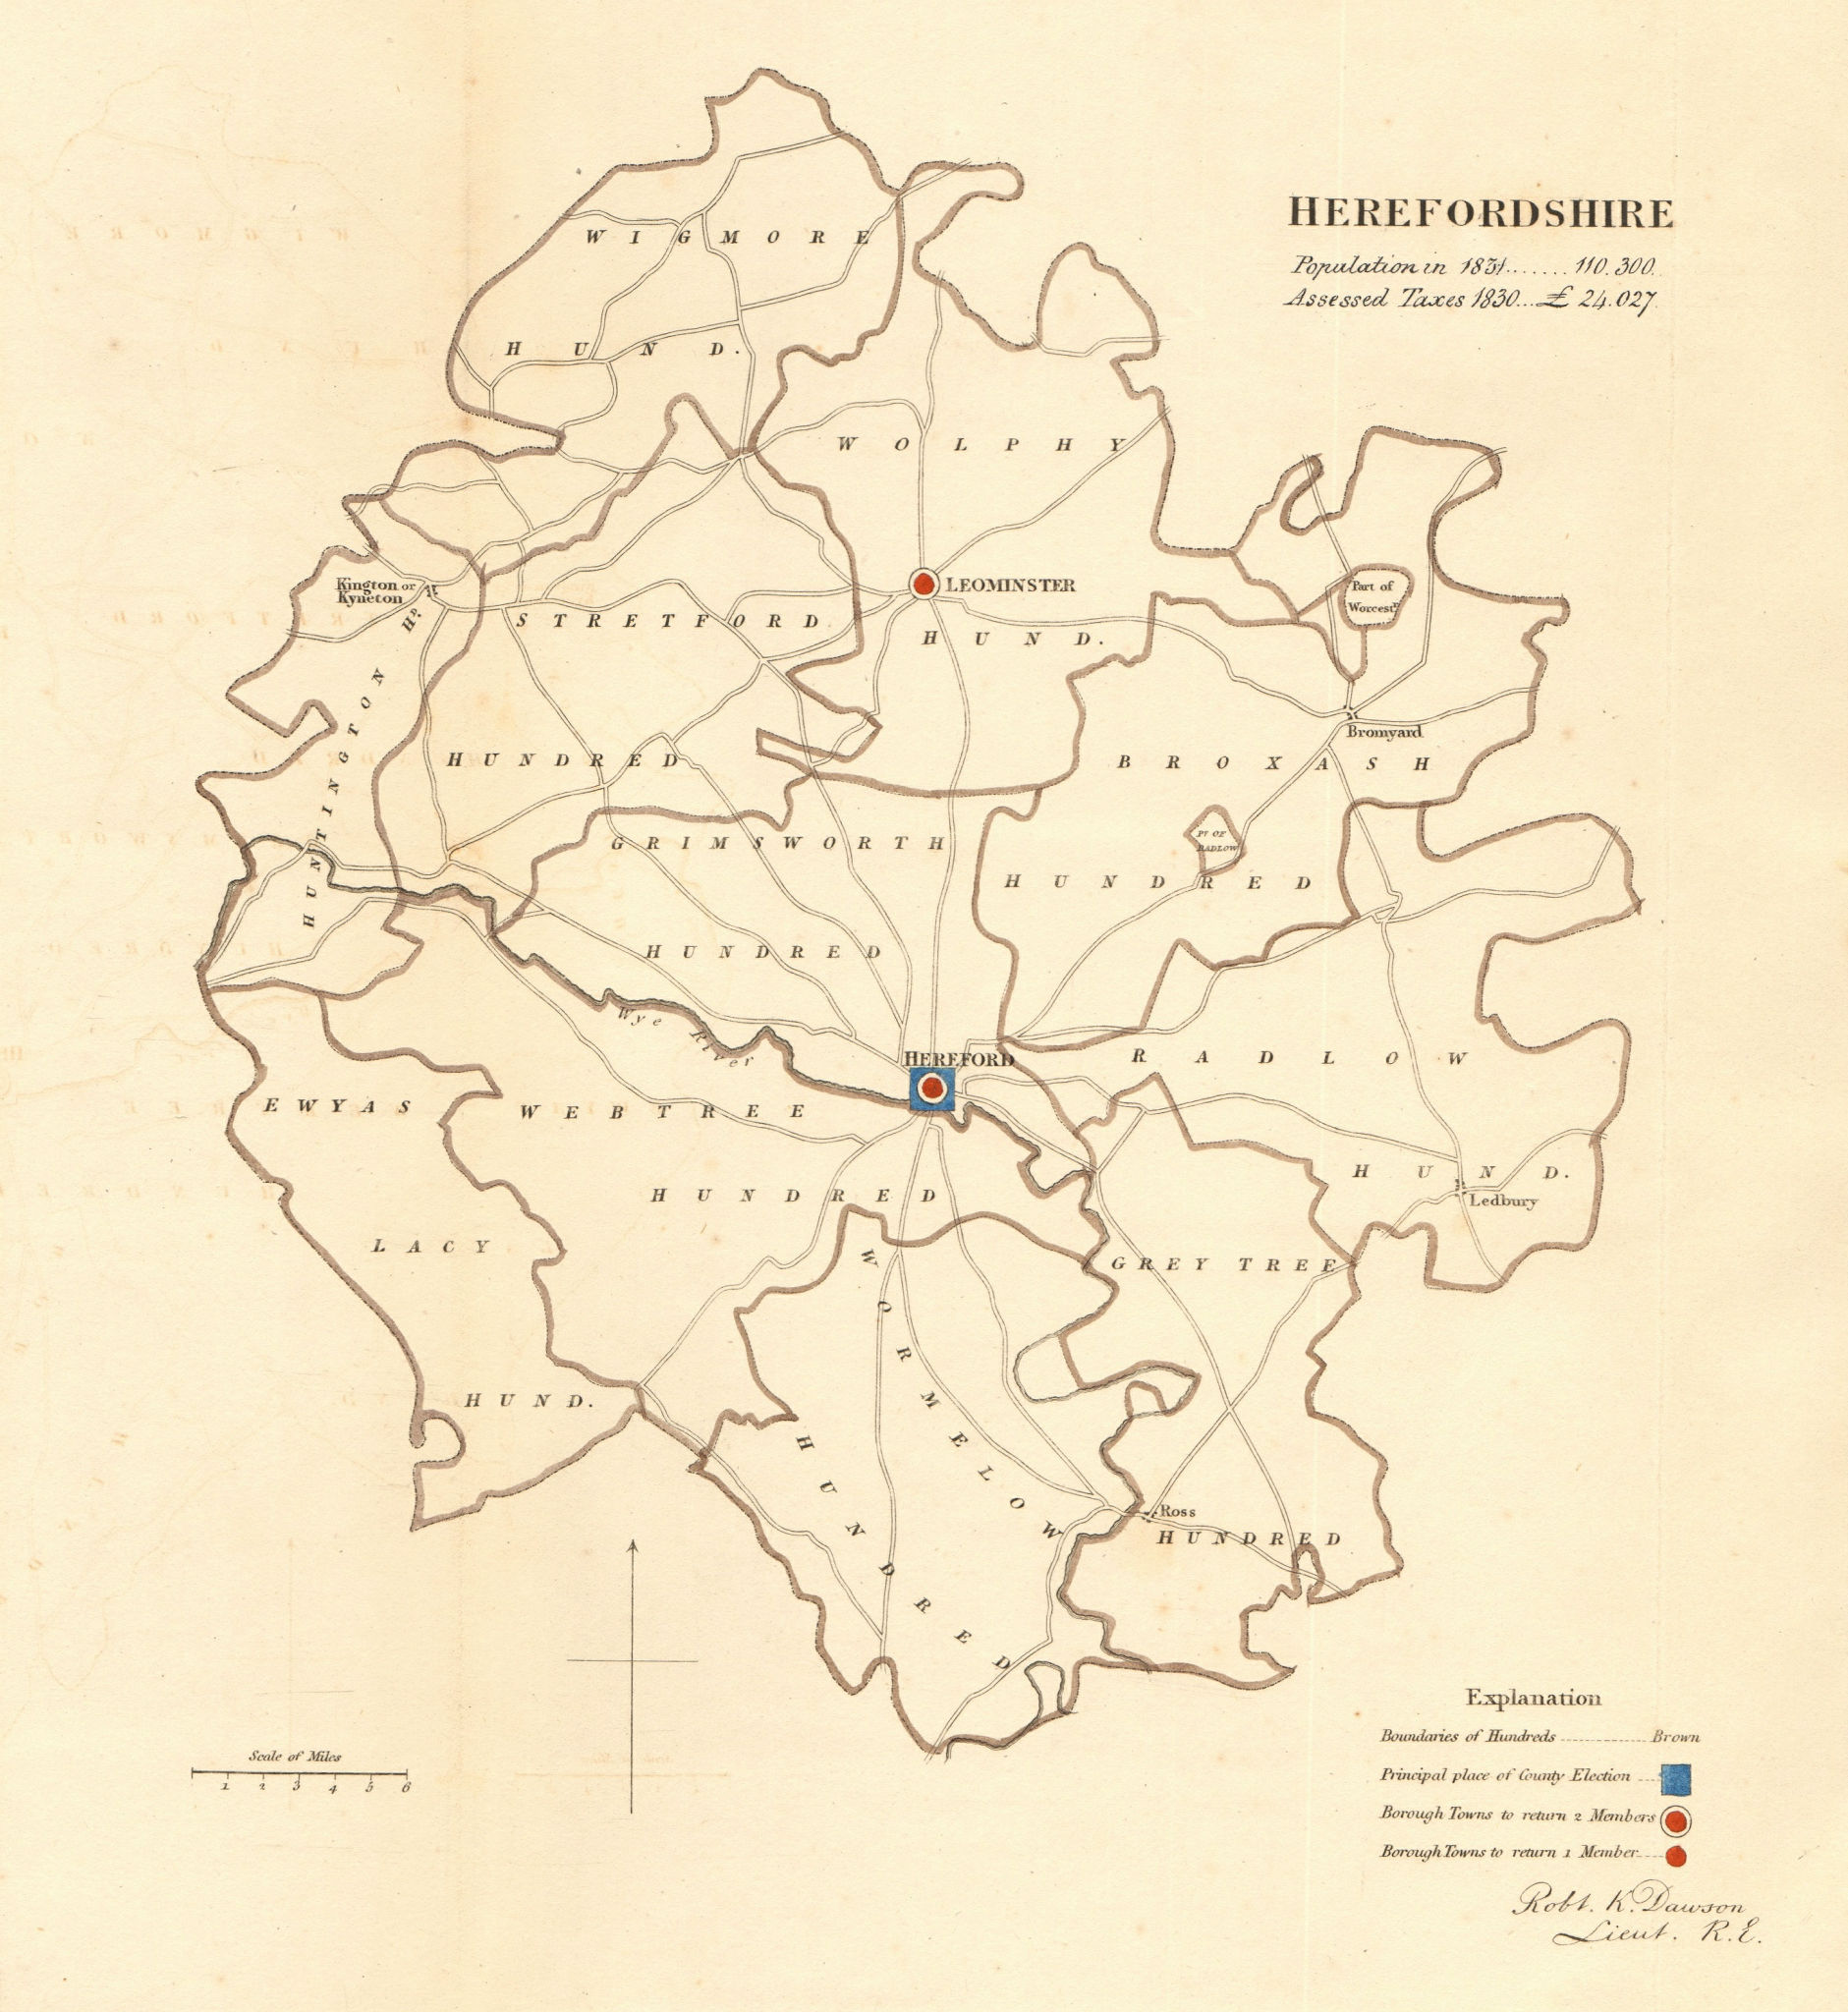 Associate Product Herefordshire county map. Boroughs electoral. REFORM ACT. DAWSON 1832 old